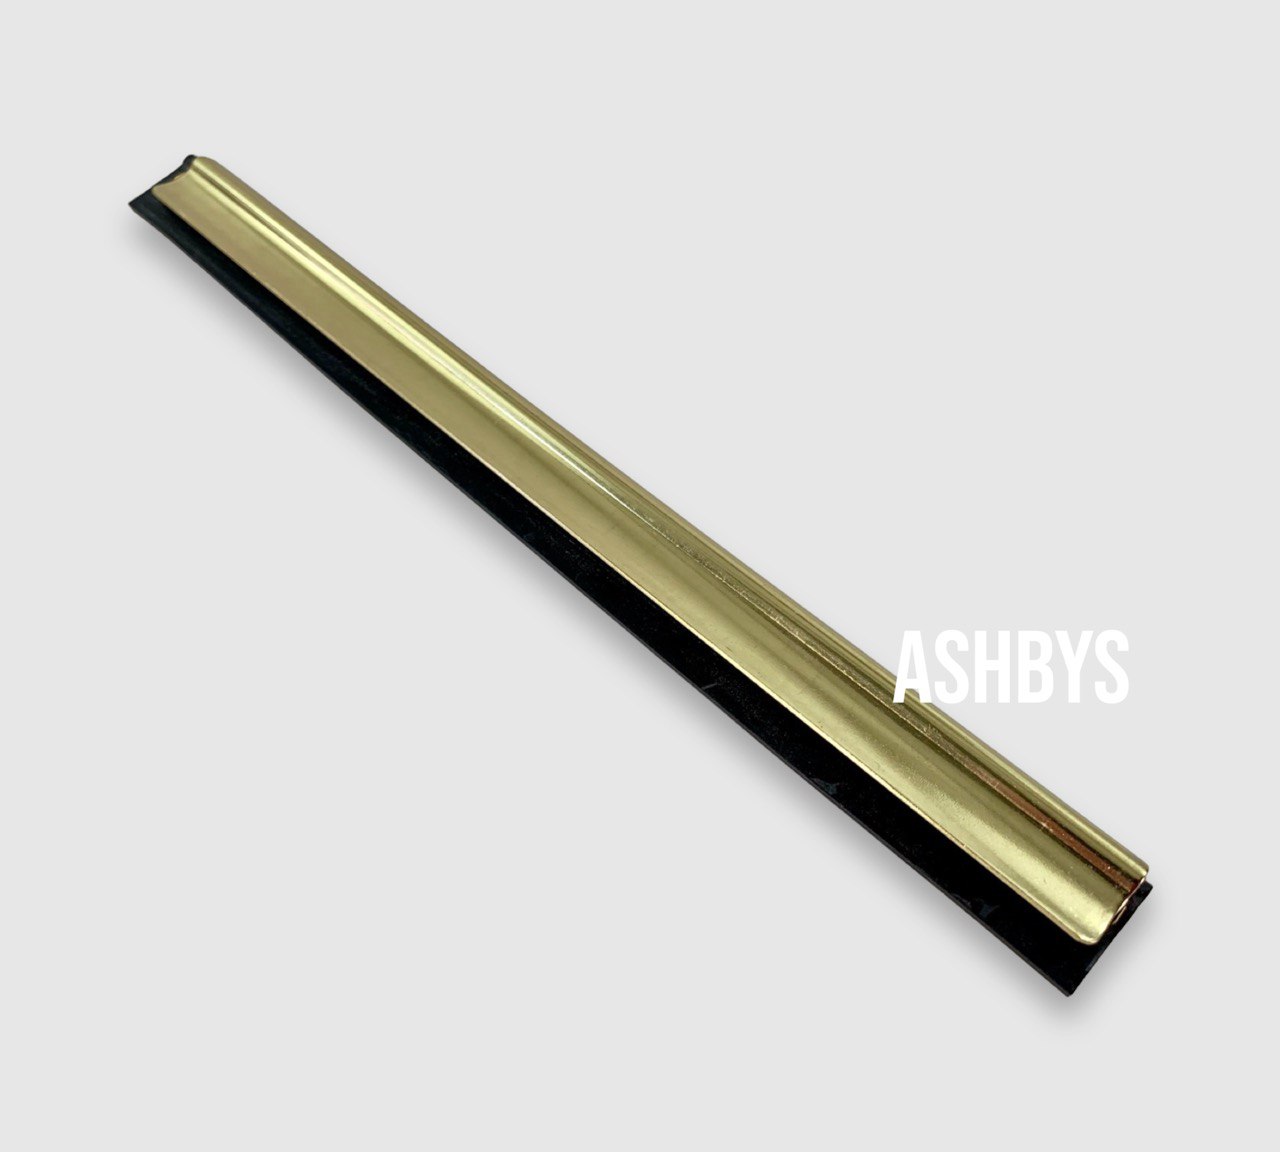 Brass Squeegee Channel (25 cm / 10 inch) - for Window Cleaning